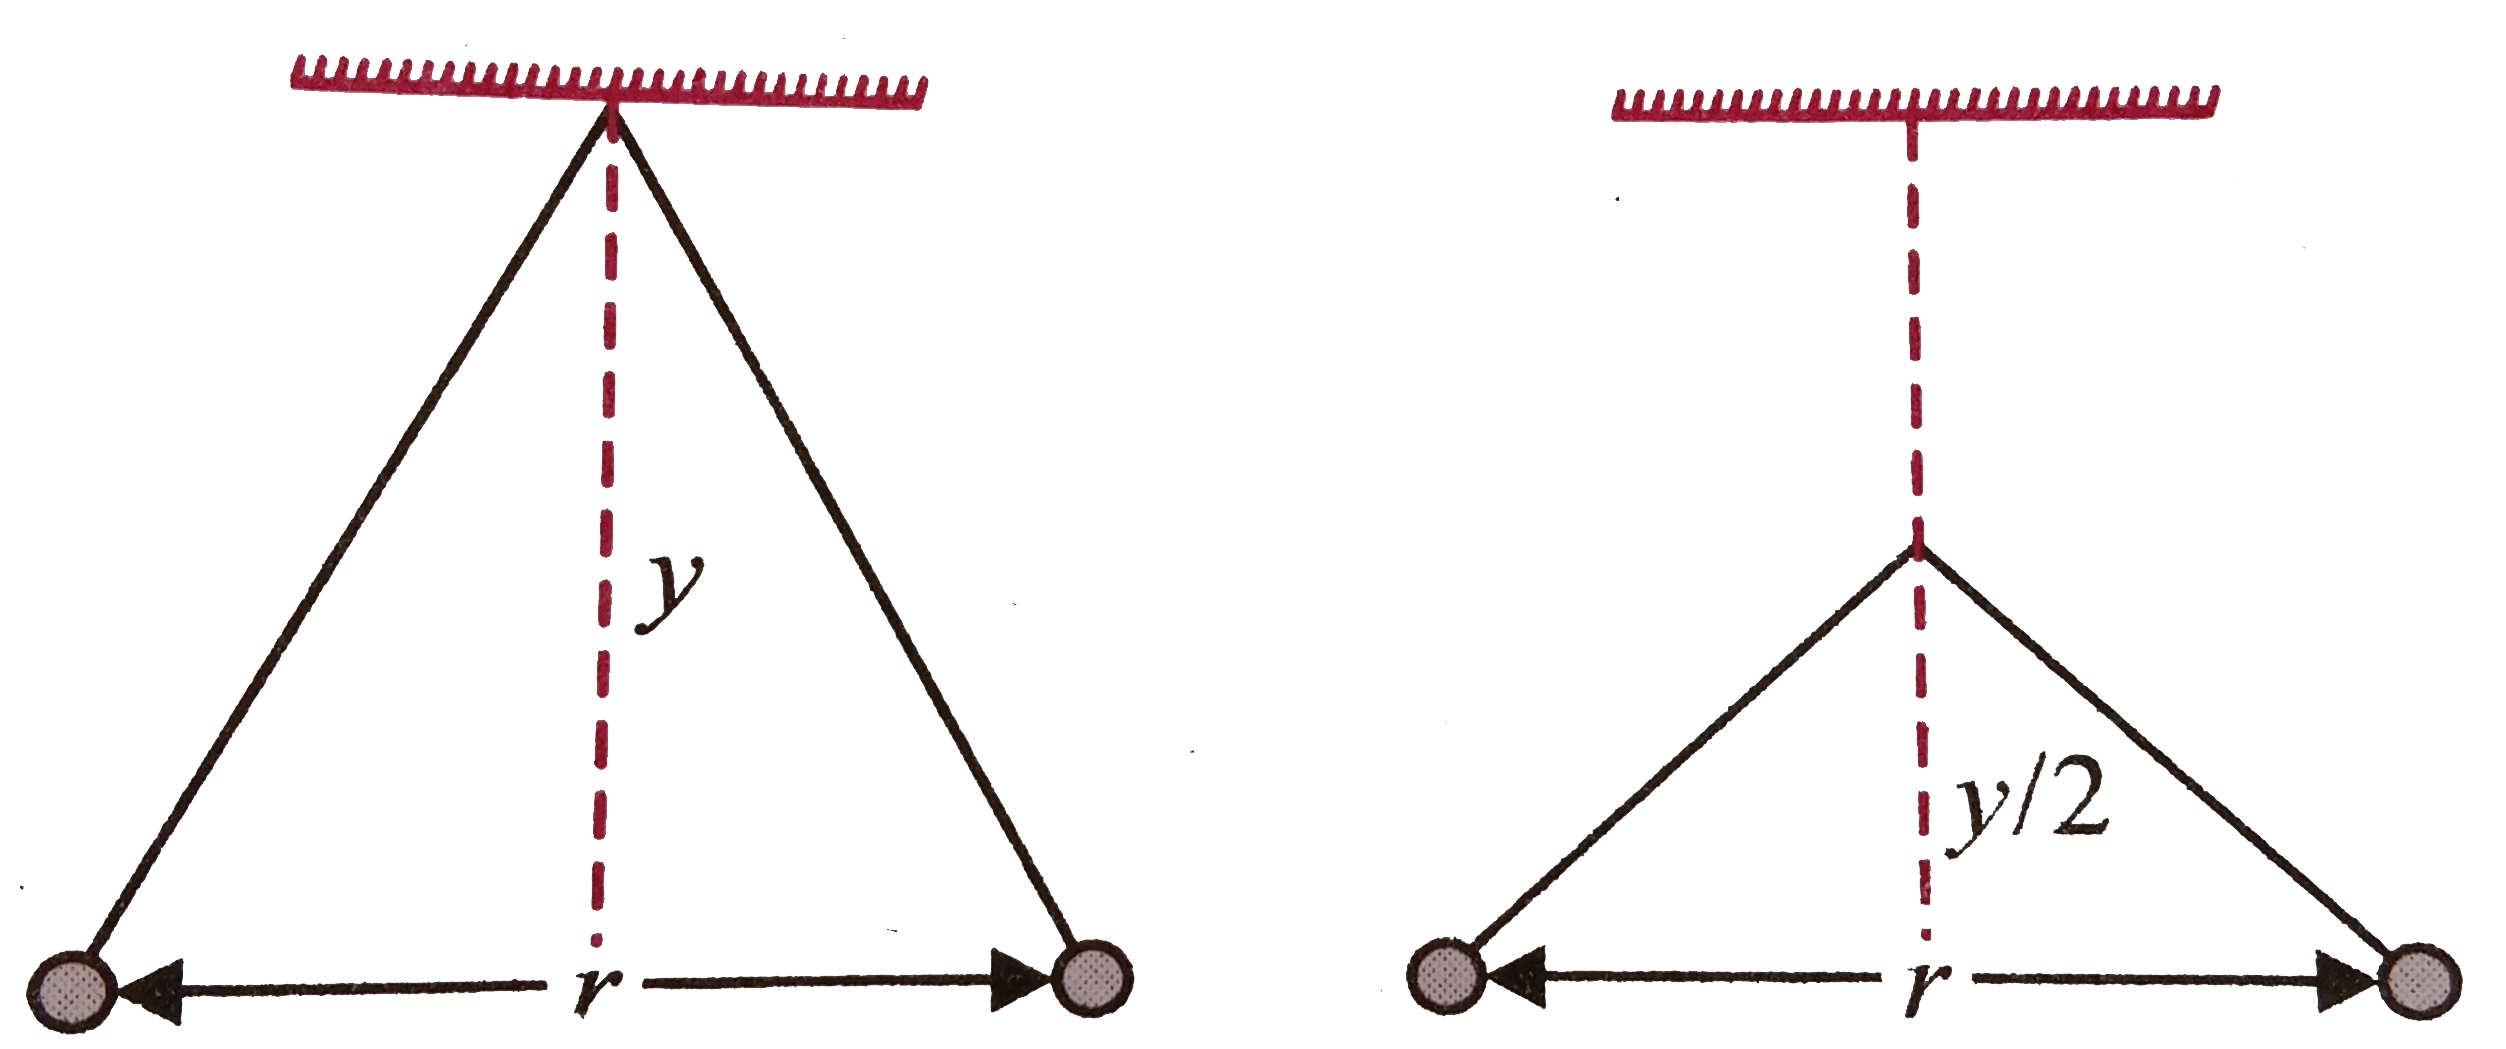 Two path  balls carrying equal charges are suspended  from a common point by strings  of equal  length, the strings  are rightly clamped  at half the height. The equilibrium separation between the balls, now becomes :